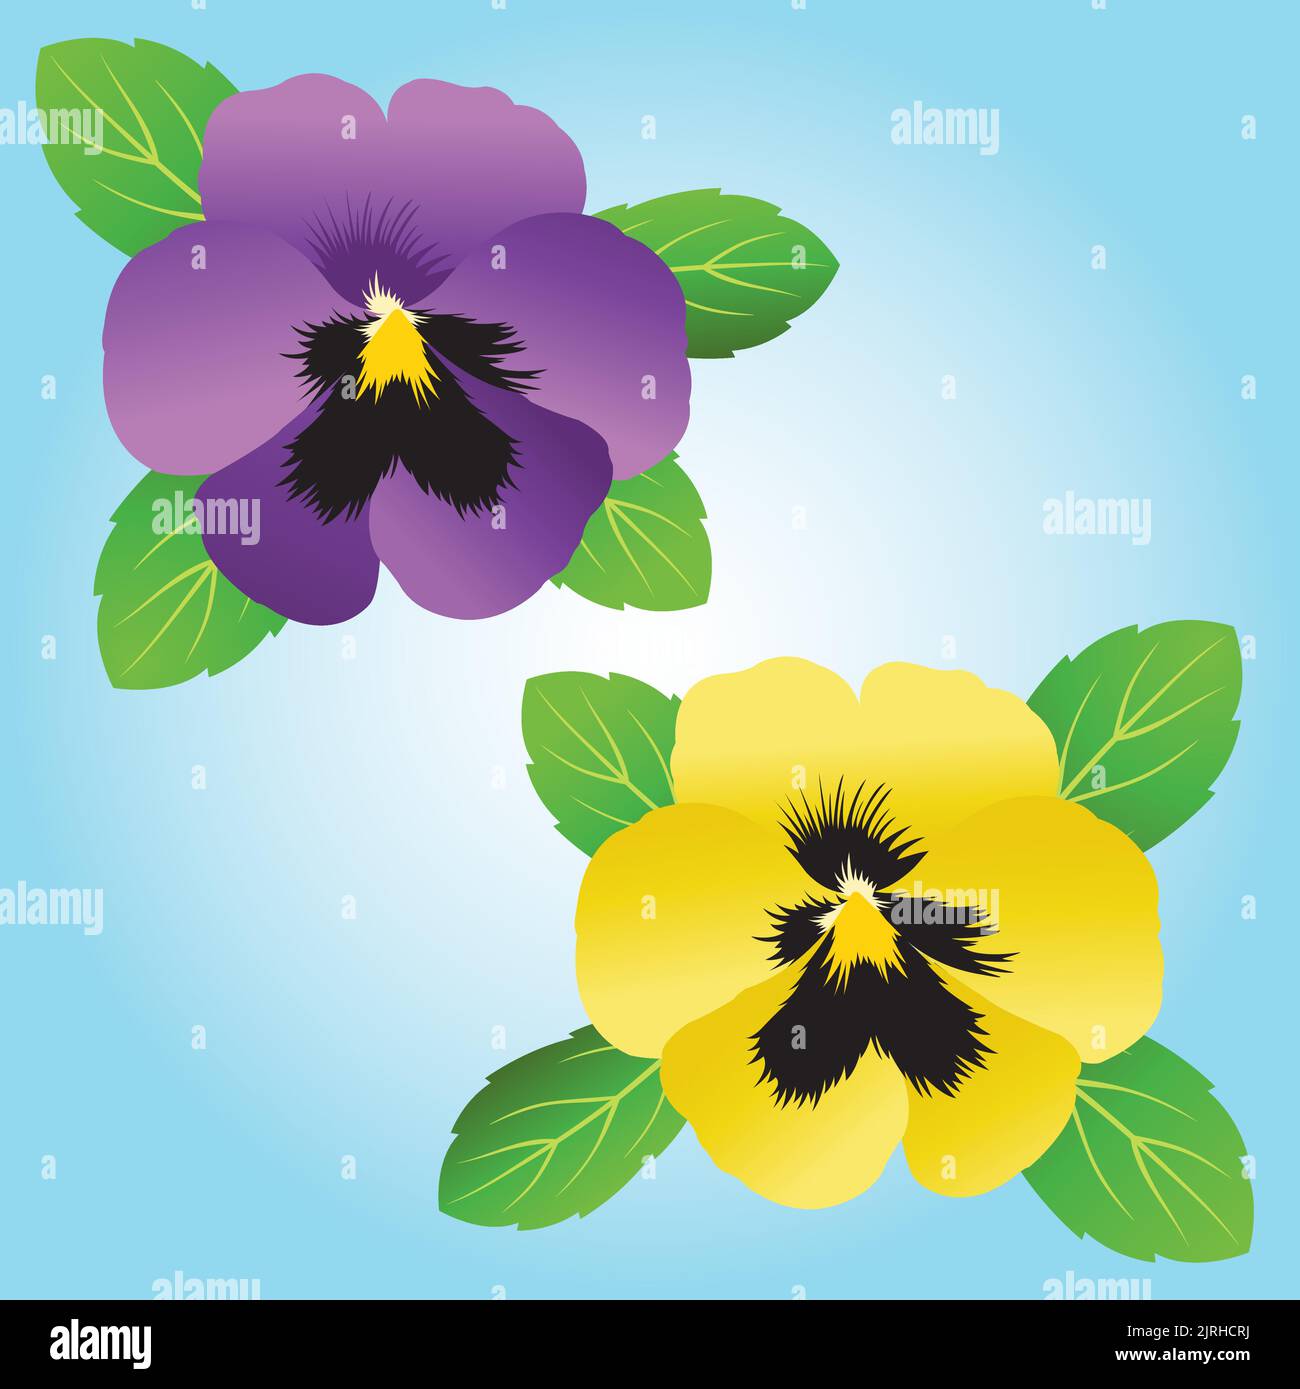 A pair of graphic illustrated vector pansy flowers. Stock Vector